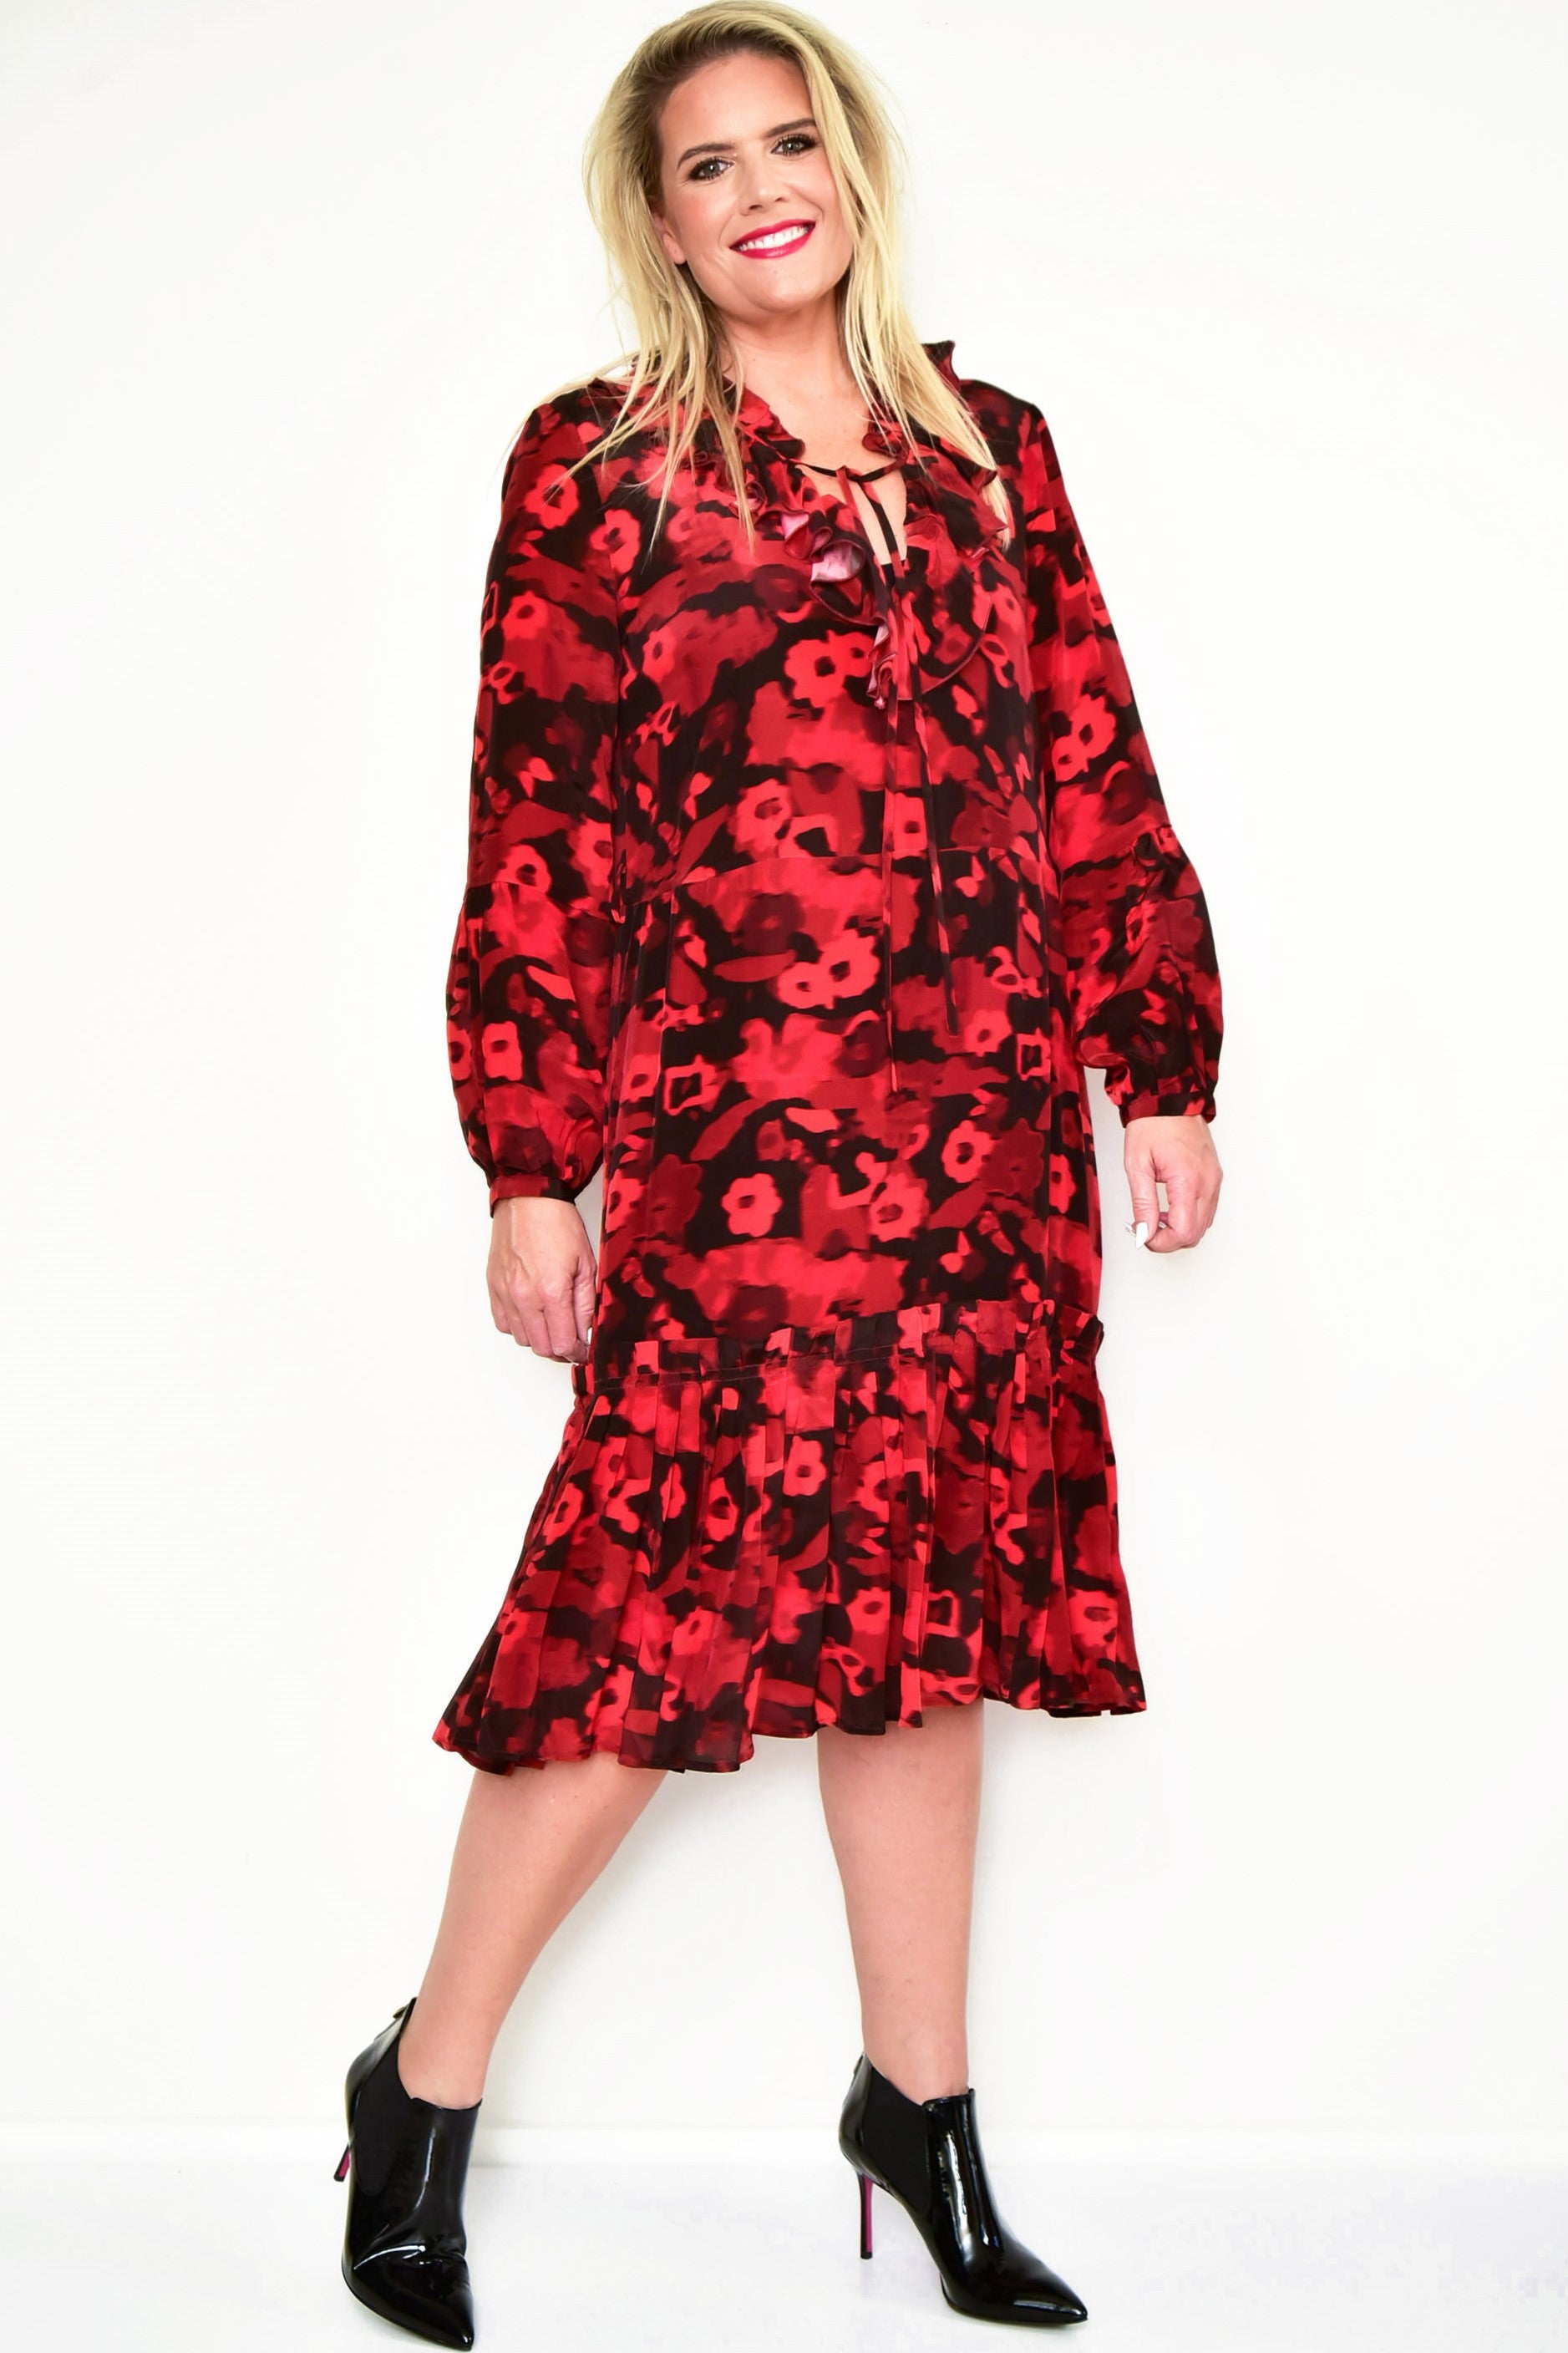 COOPER Frill Me On Dress - Red Floral - PRE ORDER - COOPER by Trelise Cooper - [product type] - Magpie Style